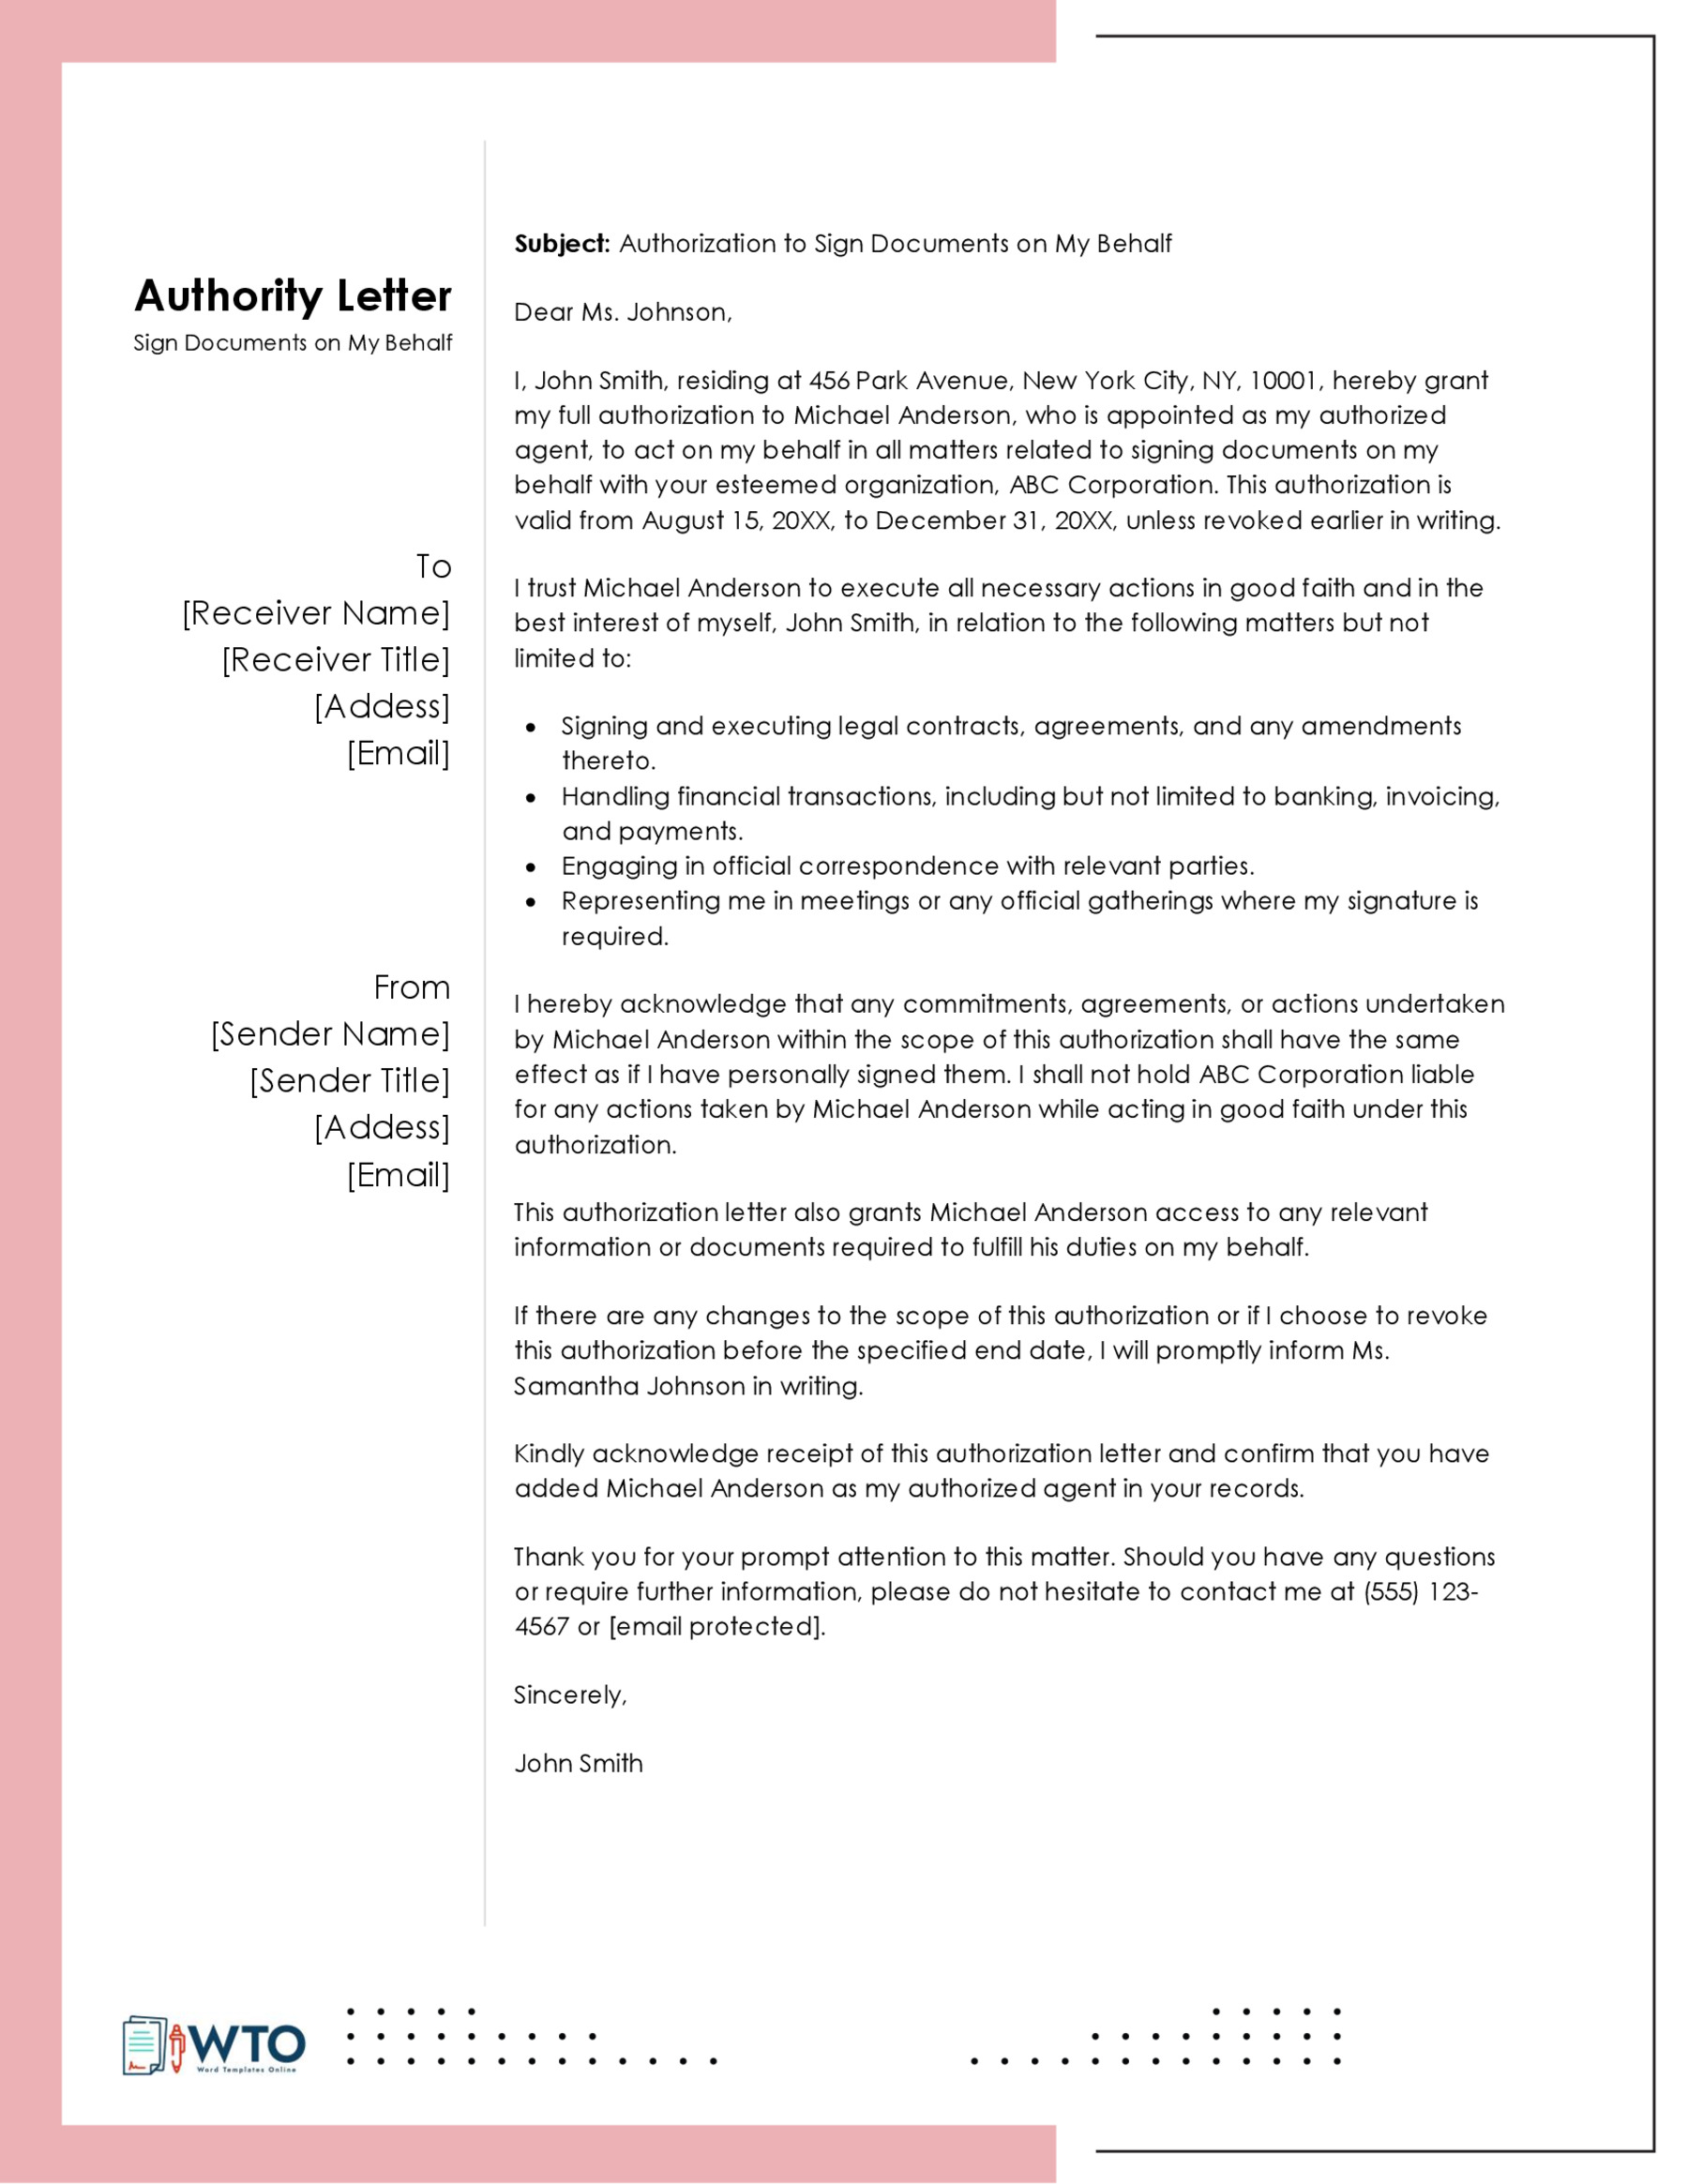 Sample Authorization letter to to Sigh Documents-Free Download